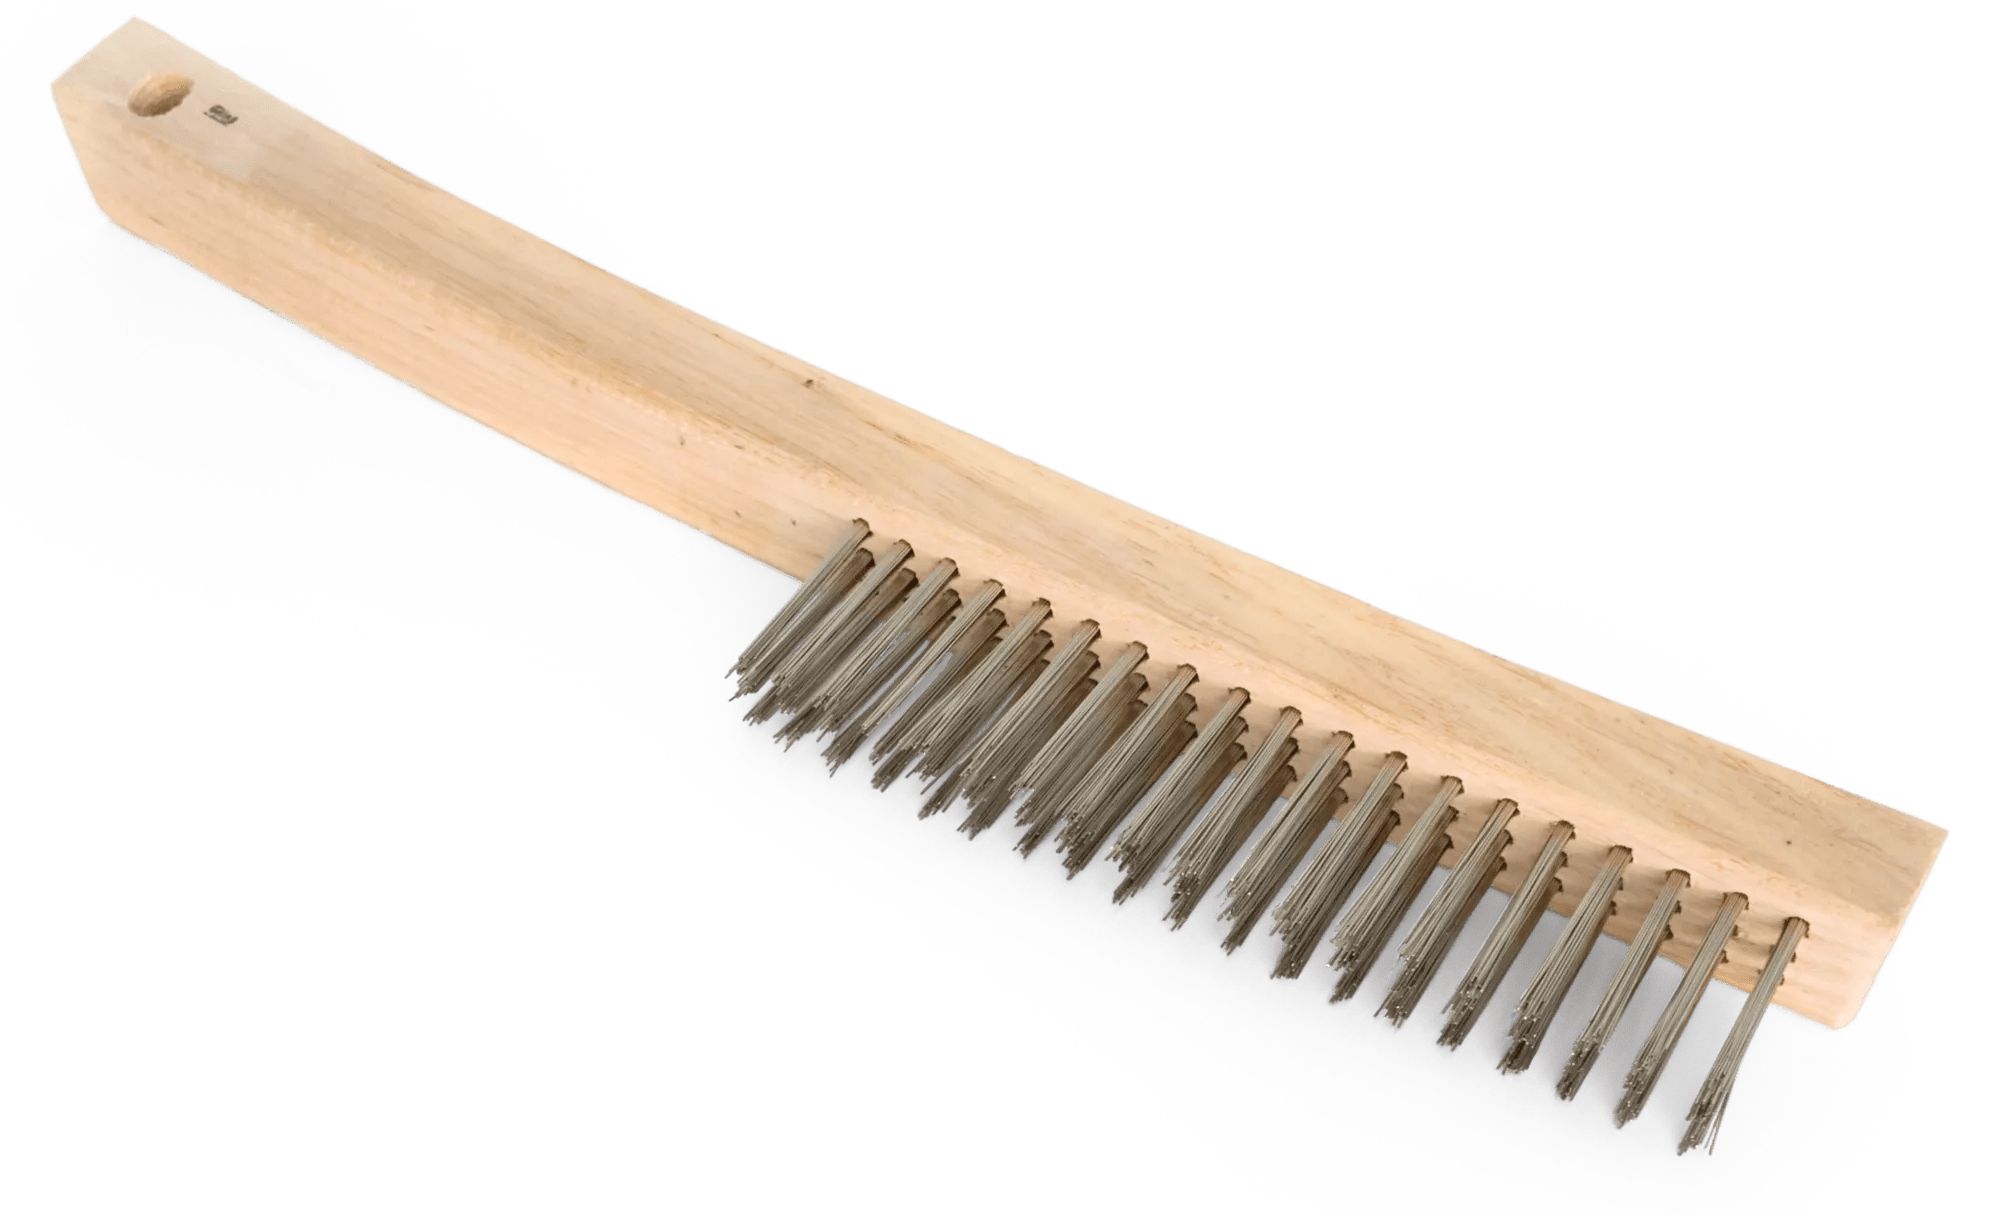 14" x 1" Bent Handle Stainless Steel Wire Scratch Brush